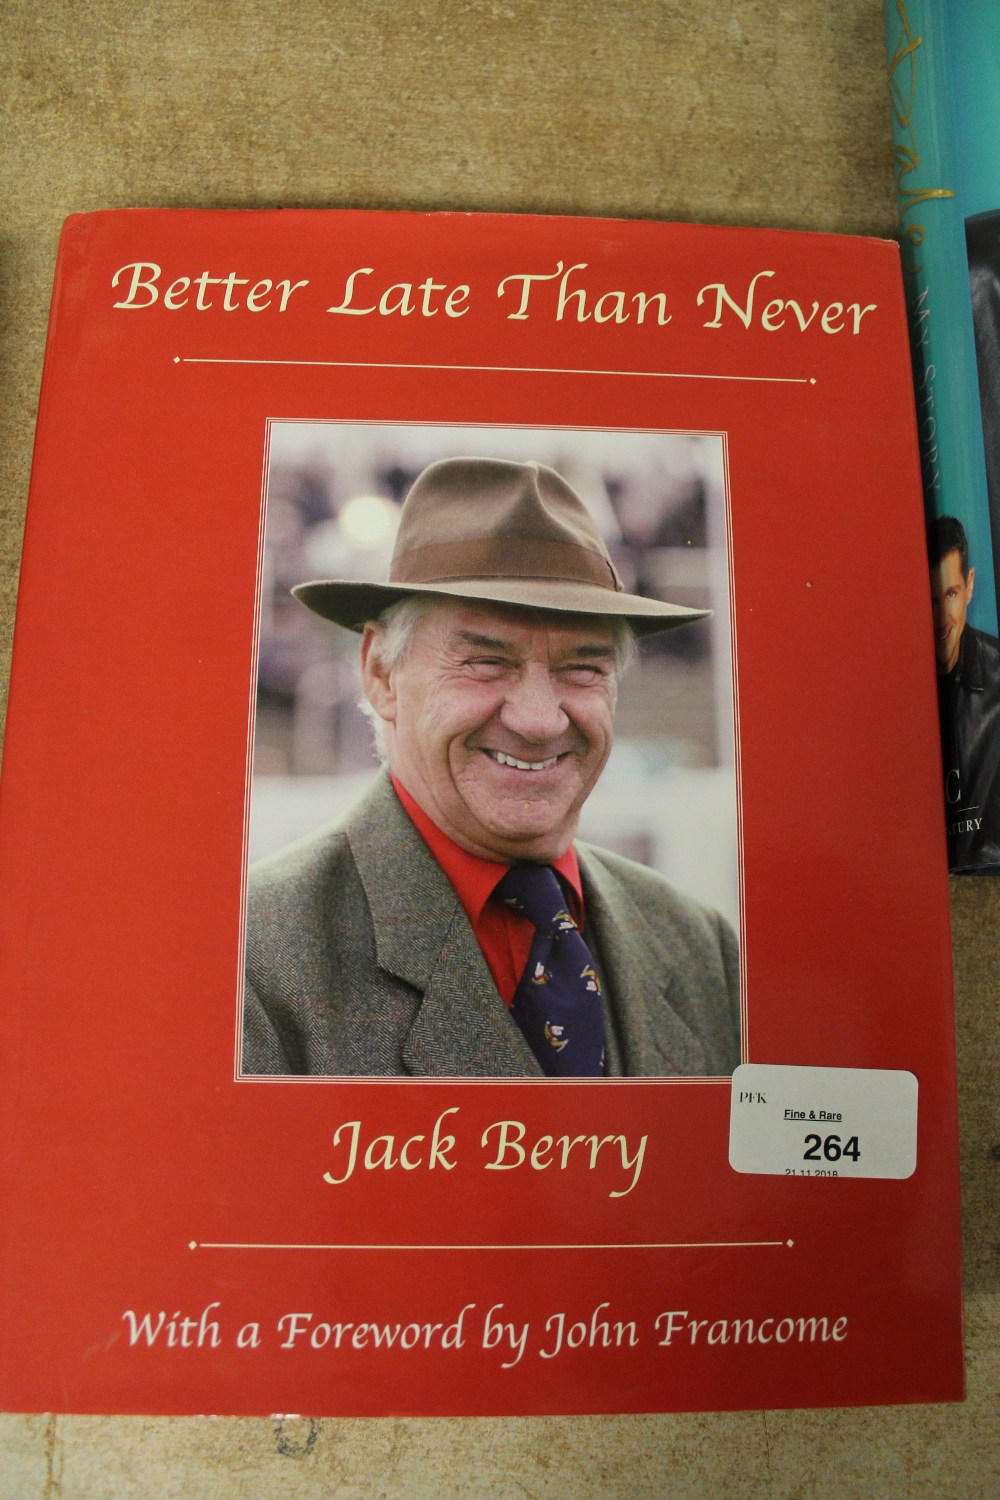 Berry [Jack] - Better Late Than Never, signed first edition, 2009, hardback with dustwrapper